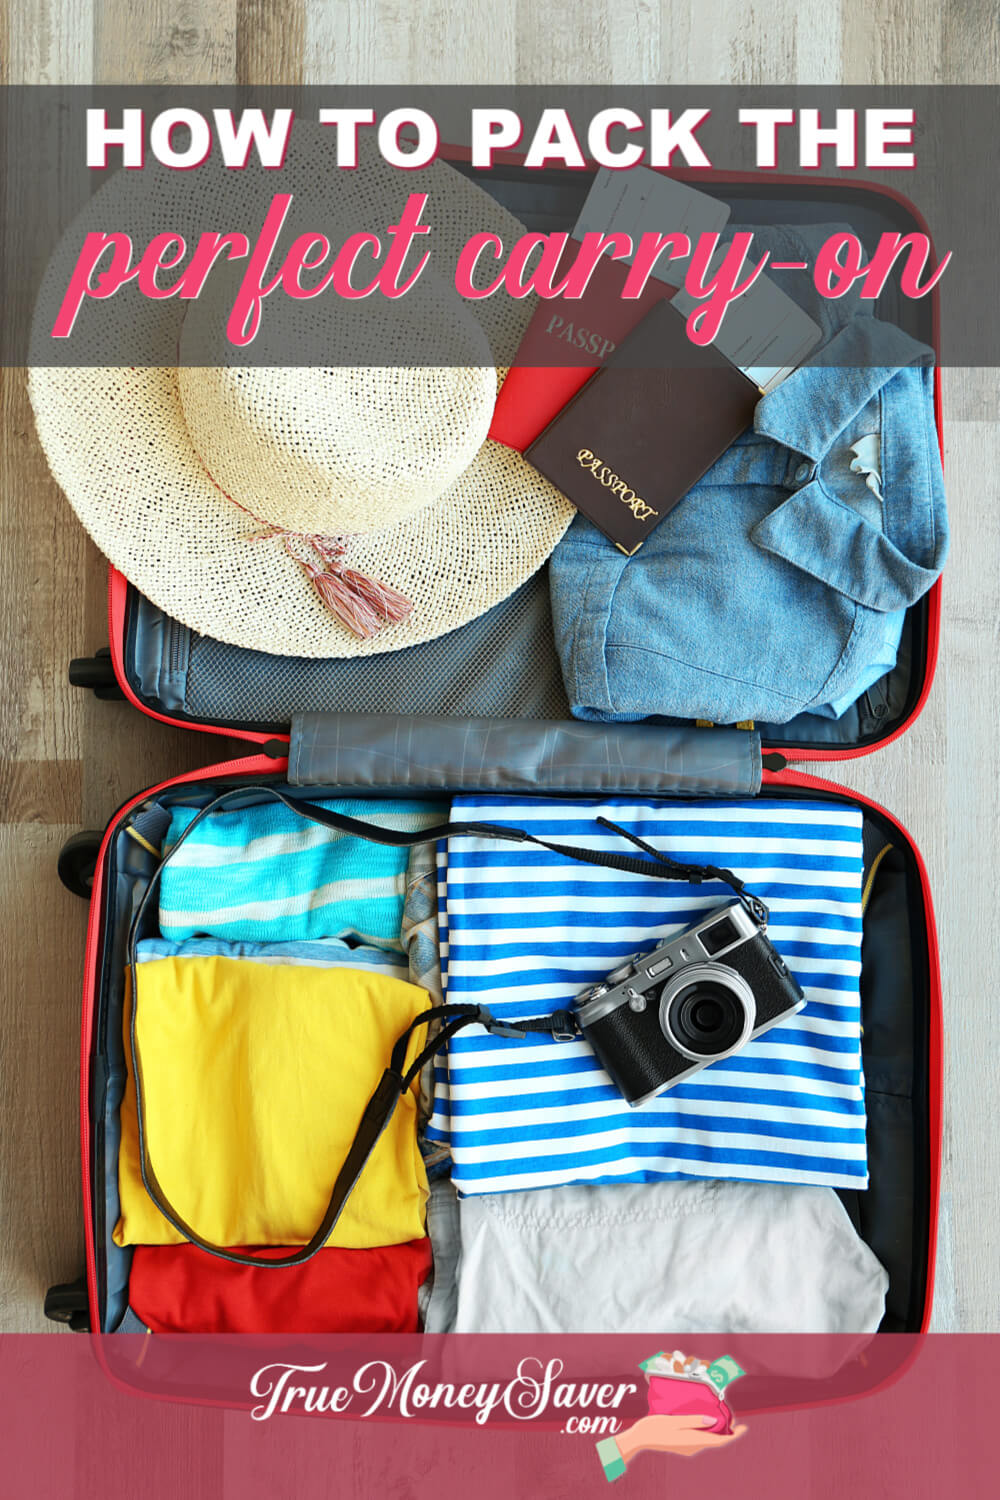 How To Pack The Perfect Carry-On To Avoid Checking Bags